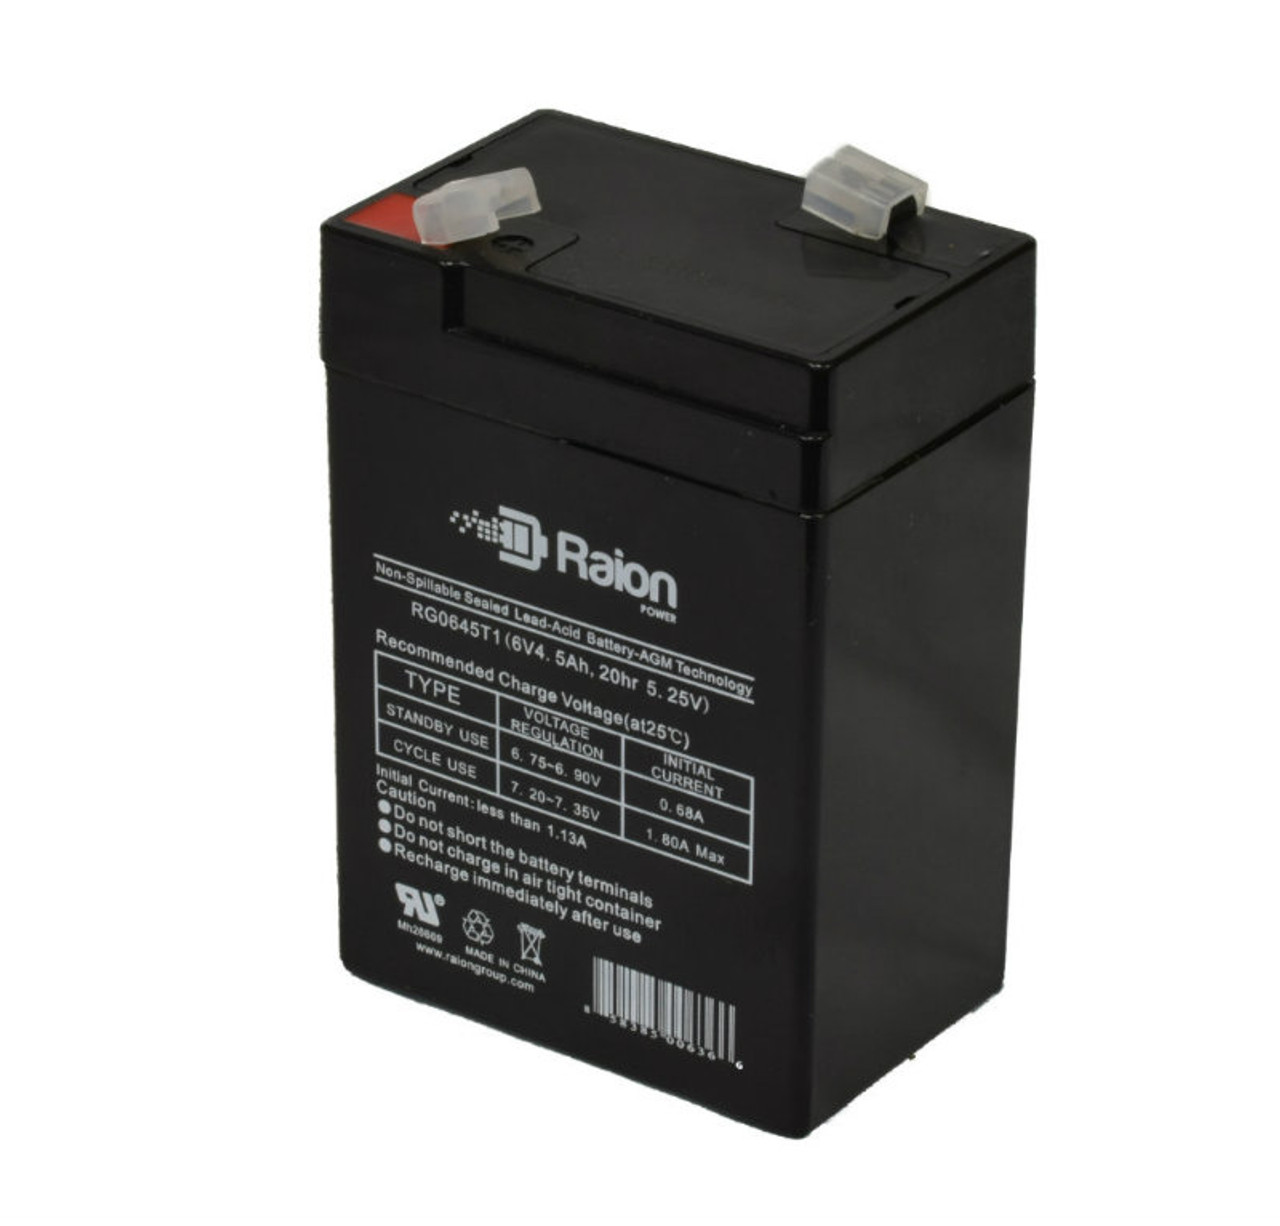 Raion Power RG0645T1 6V 4.5Ah Replacement Battery Cartridge for Sure-Lites SLHC